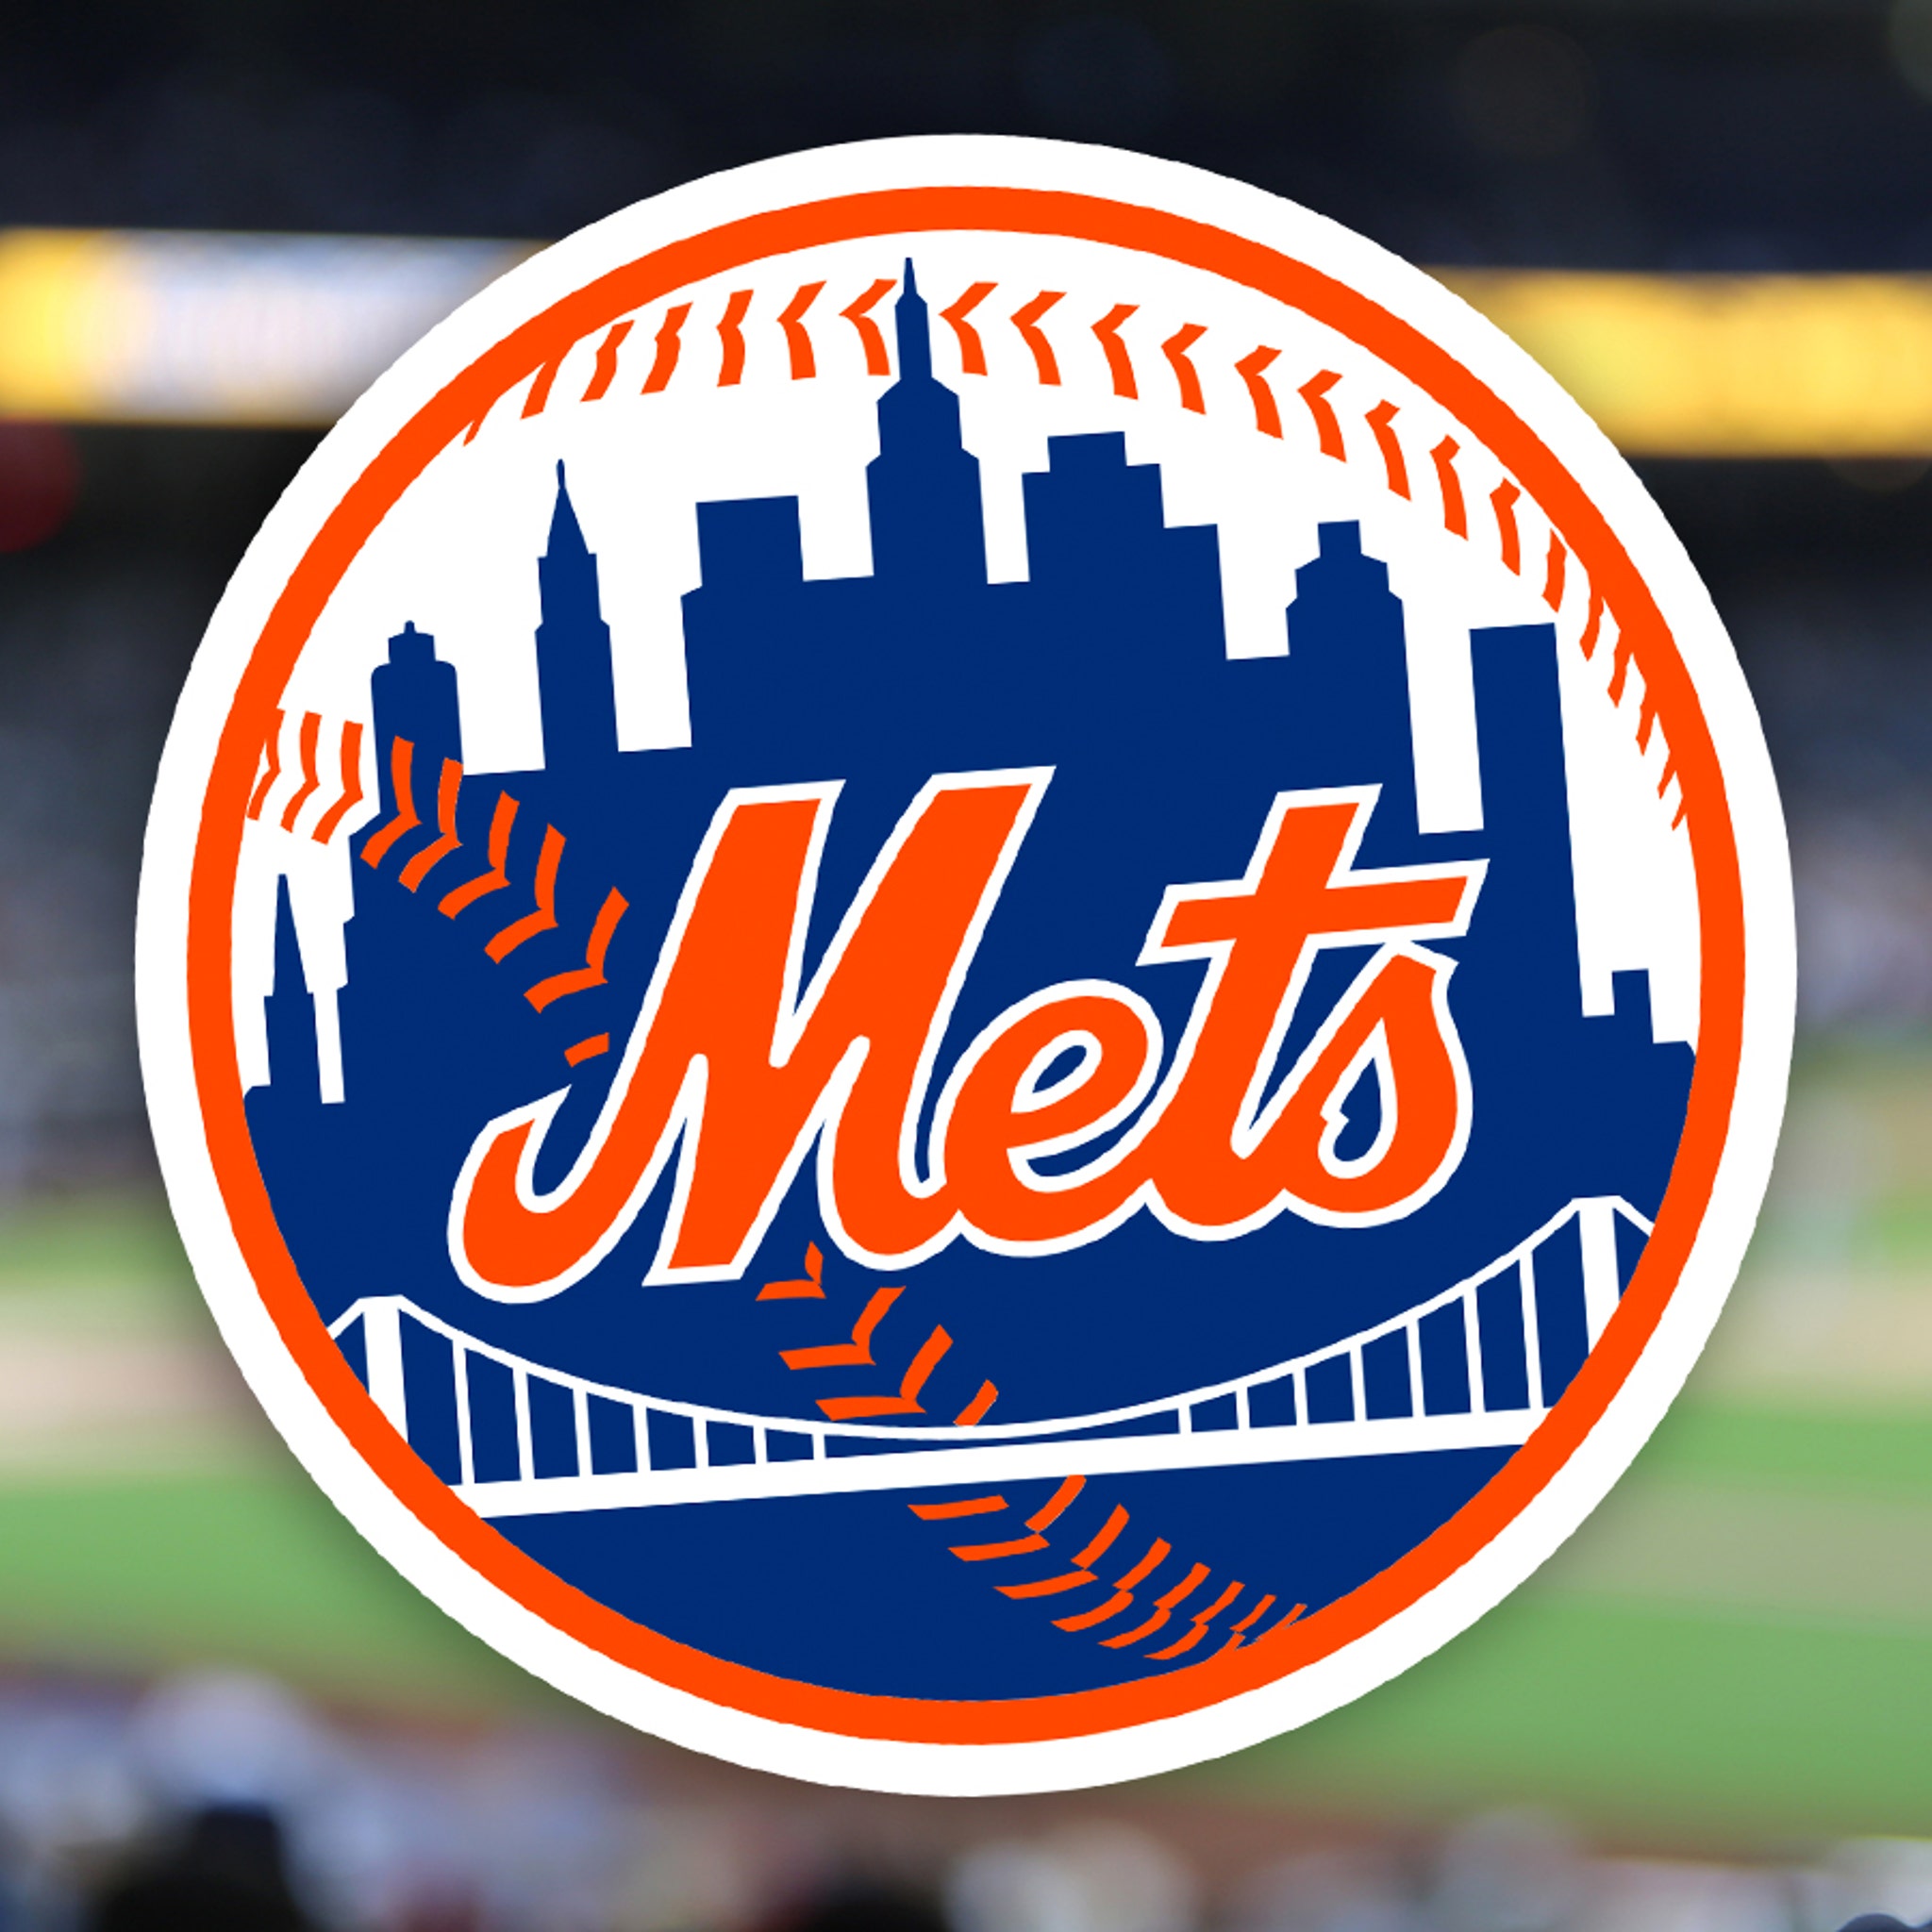 The Mets will #WearTheCaps - The Mets Police